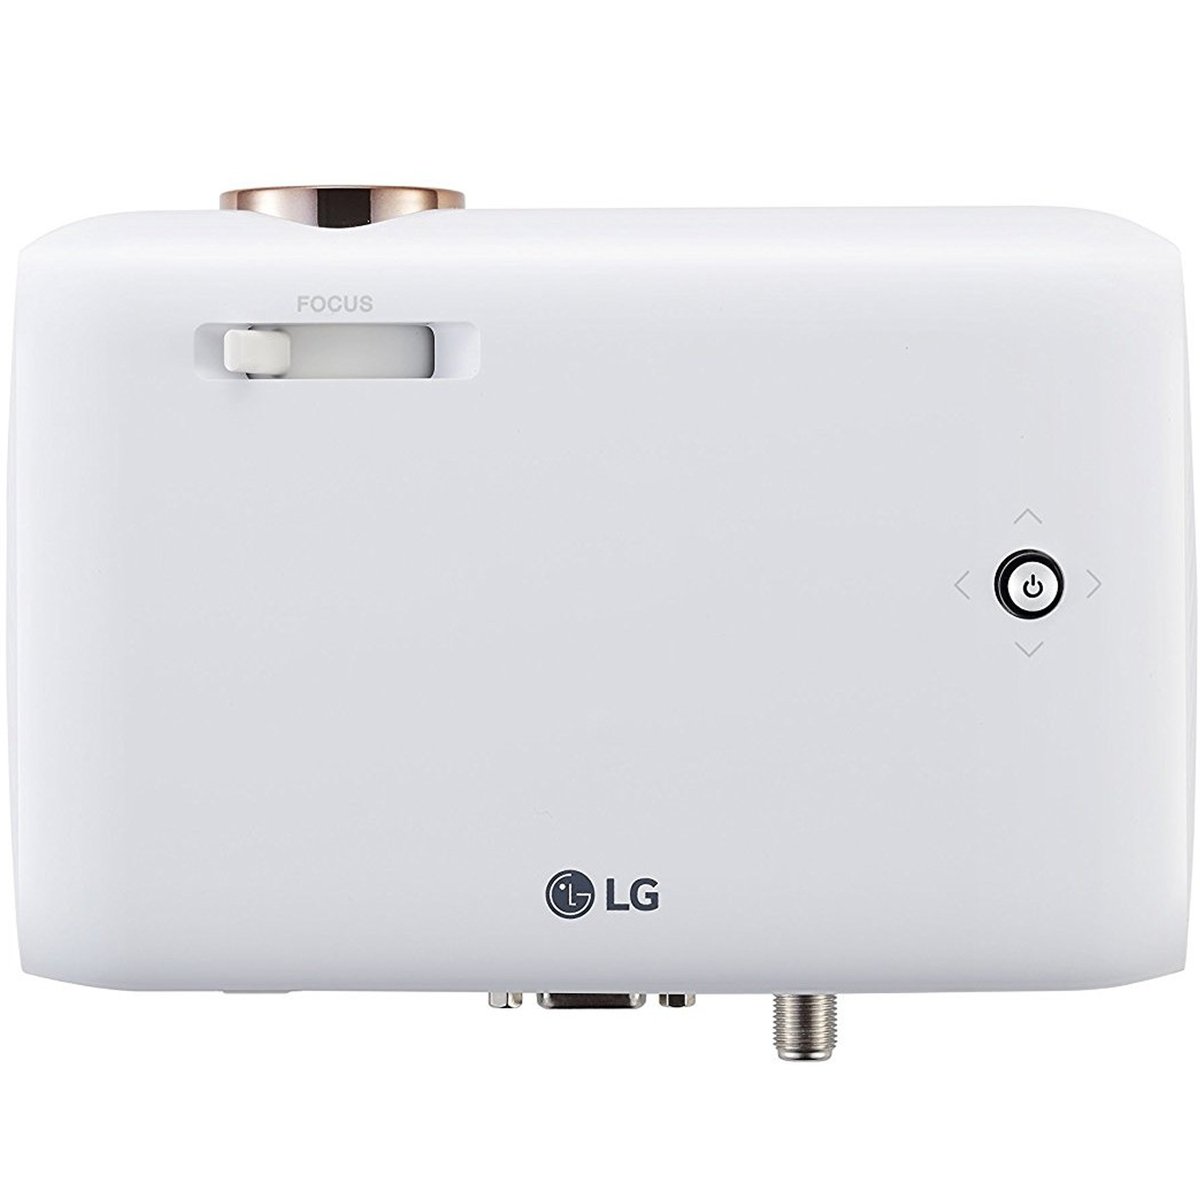 LG Minibeam LED Projector with Built-In Battery PH550